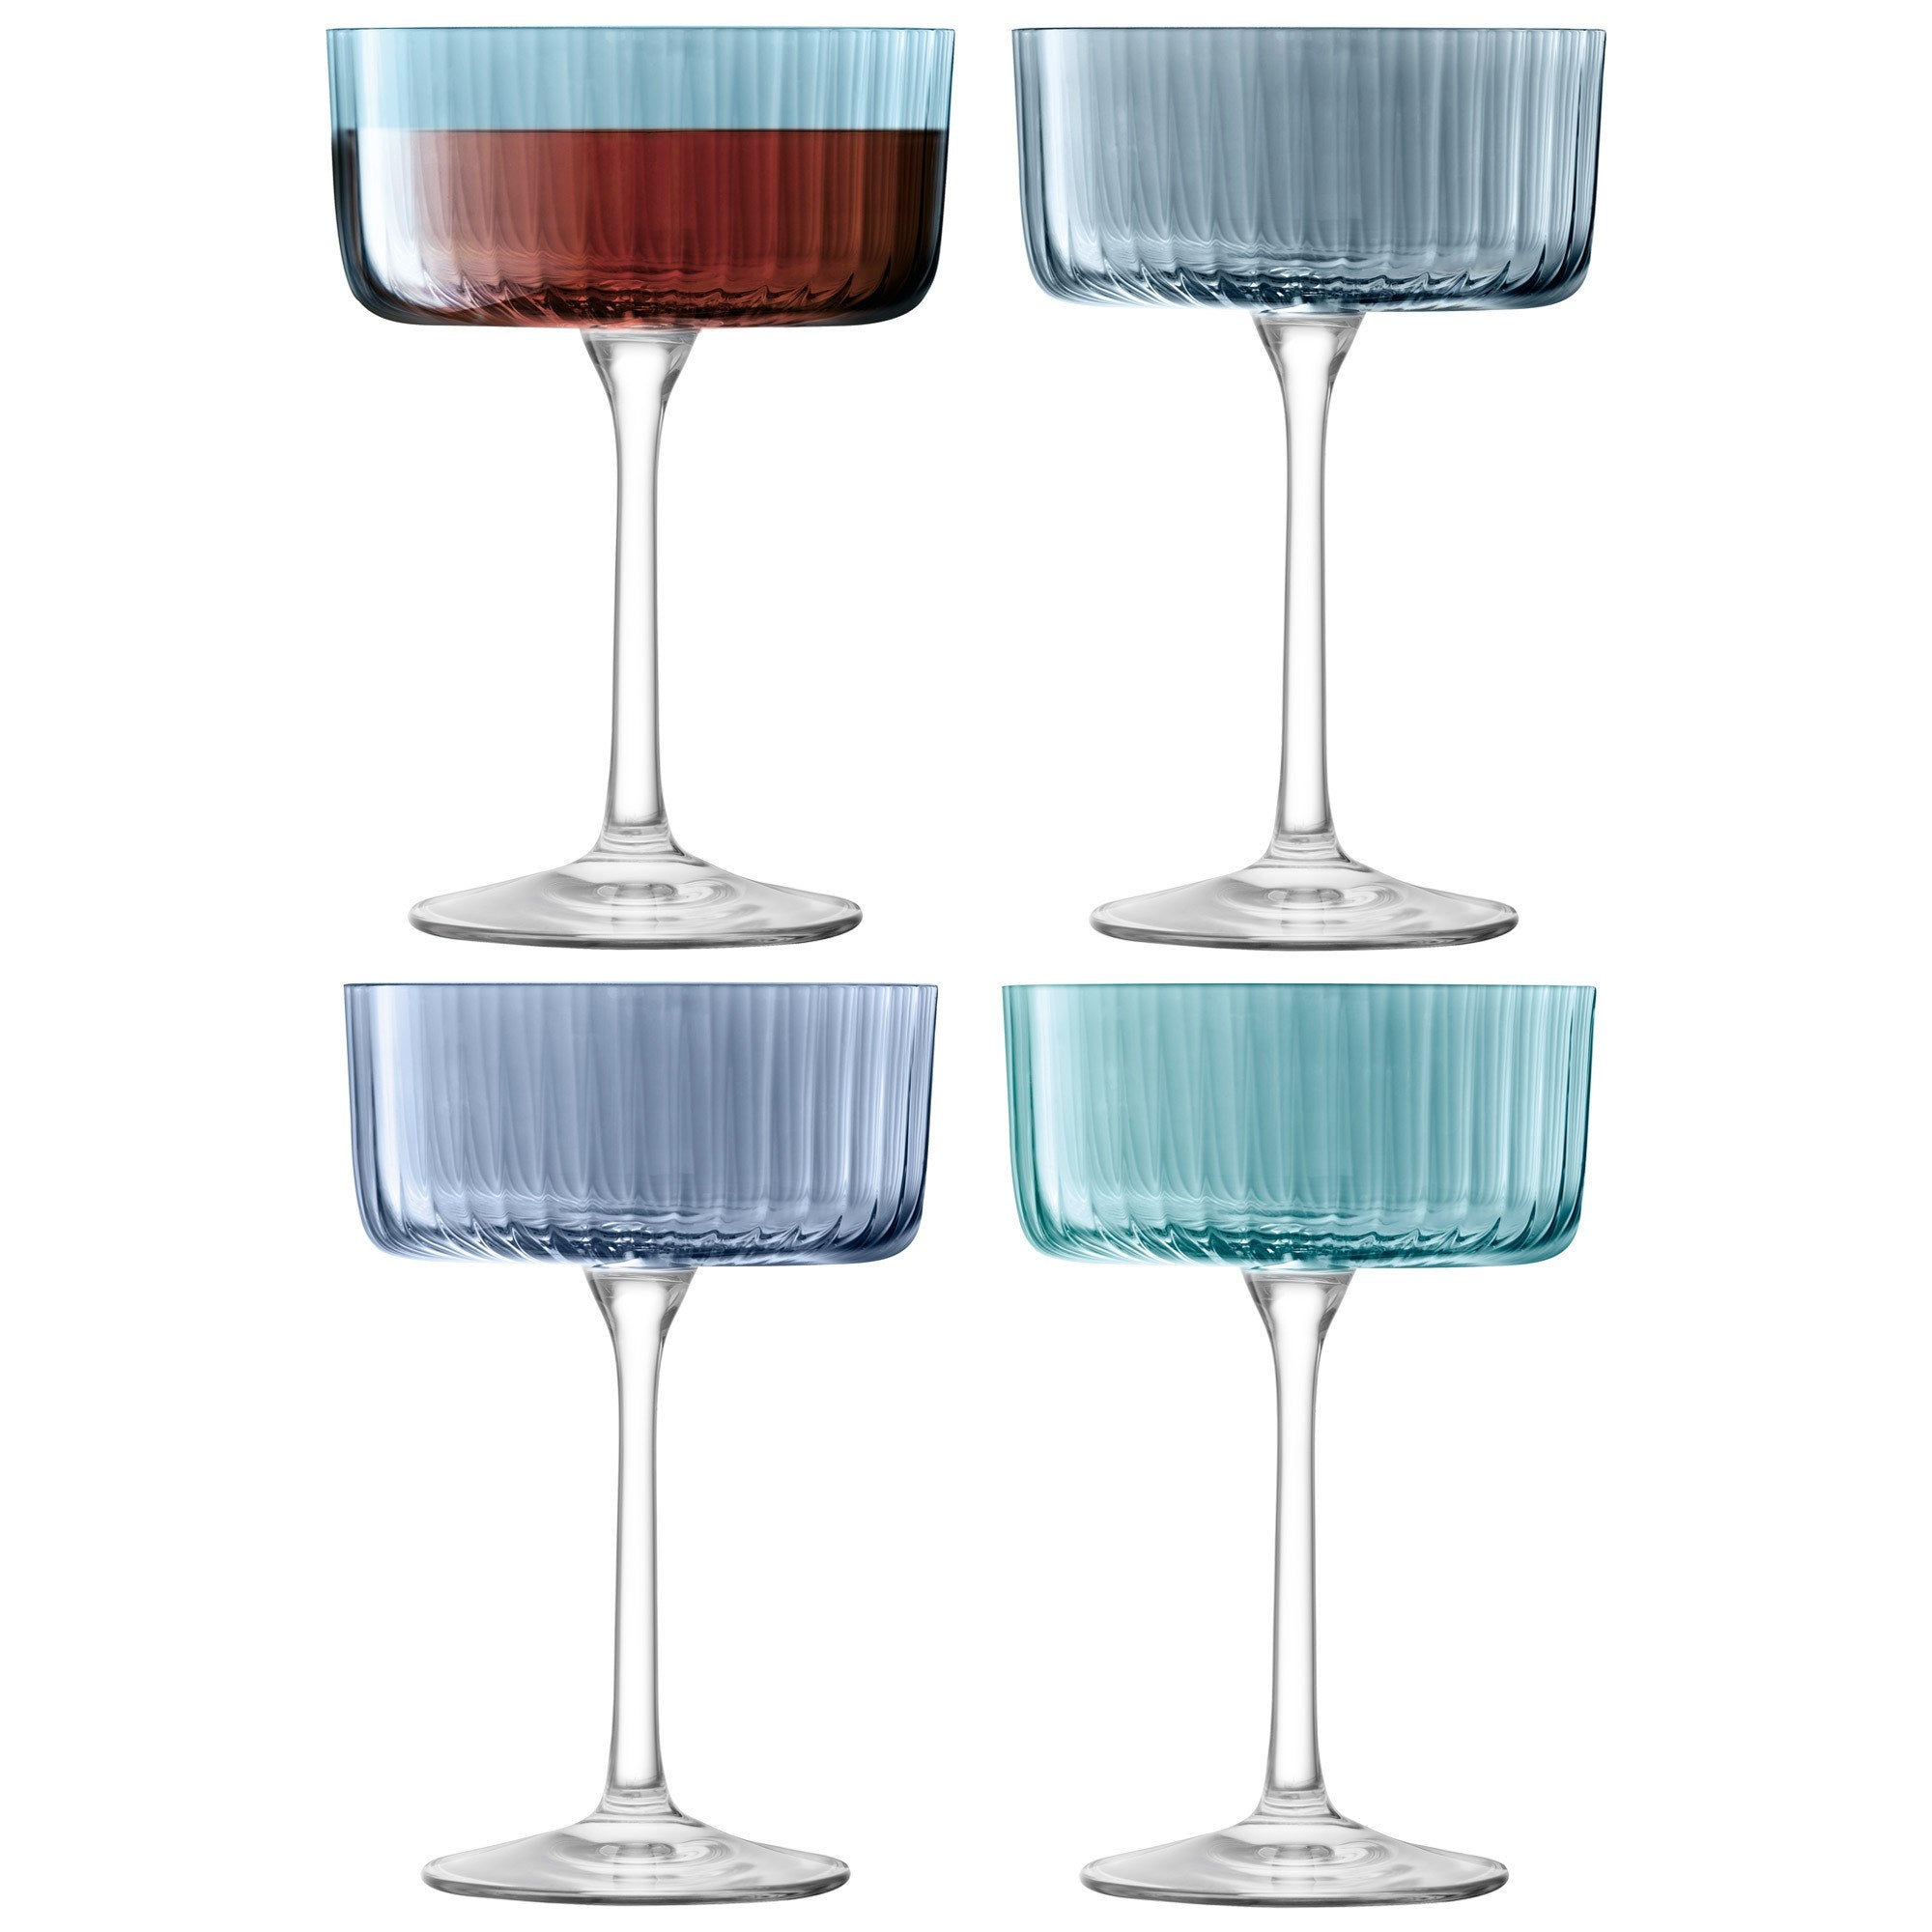 Gems Champagne Coupes Sapphire - Set of 4